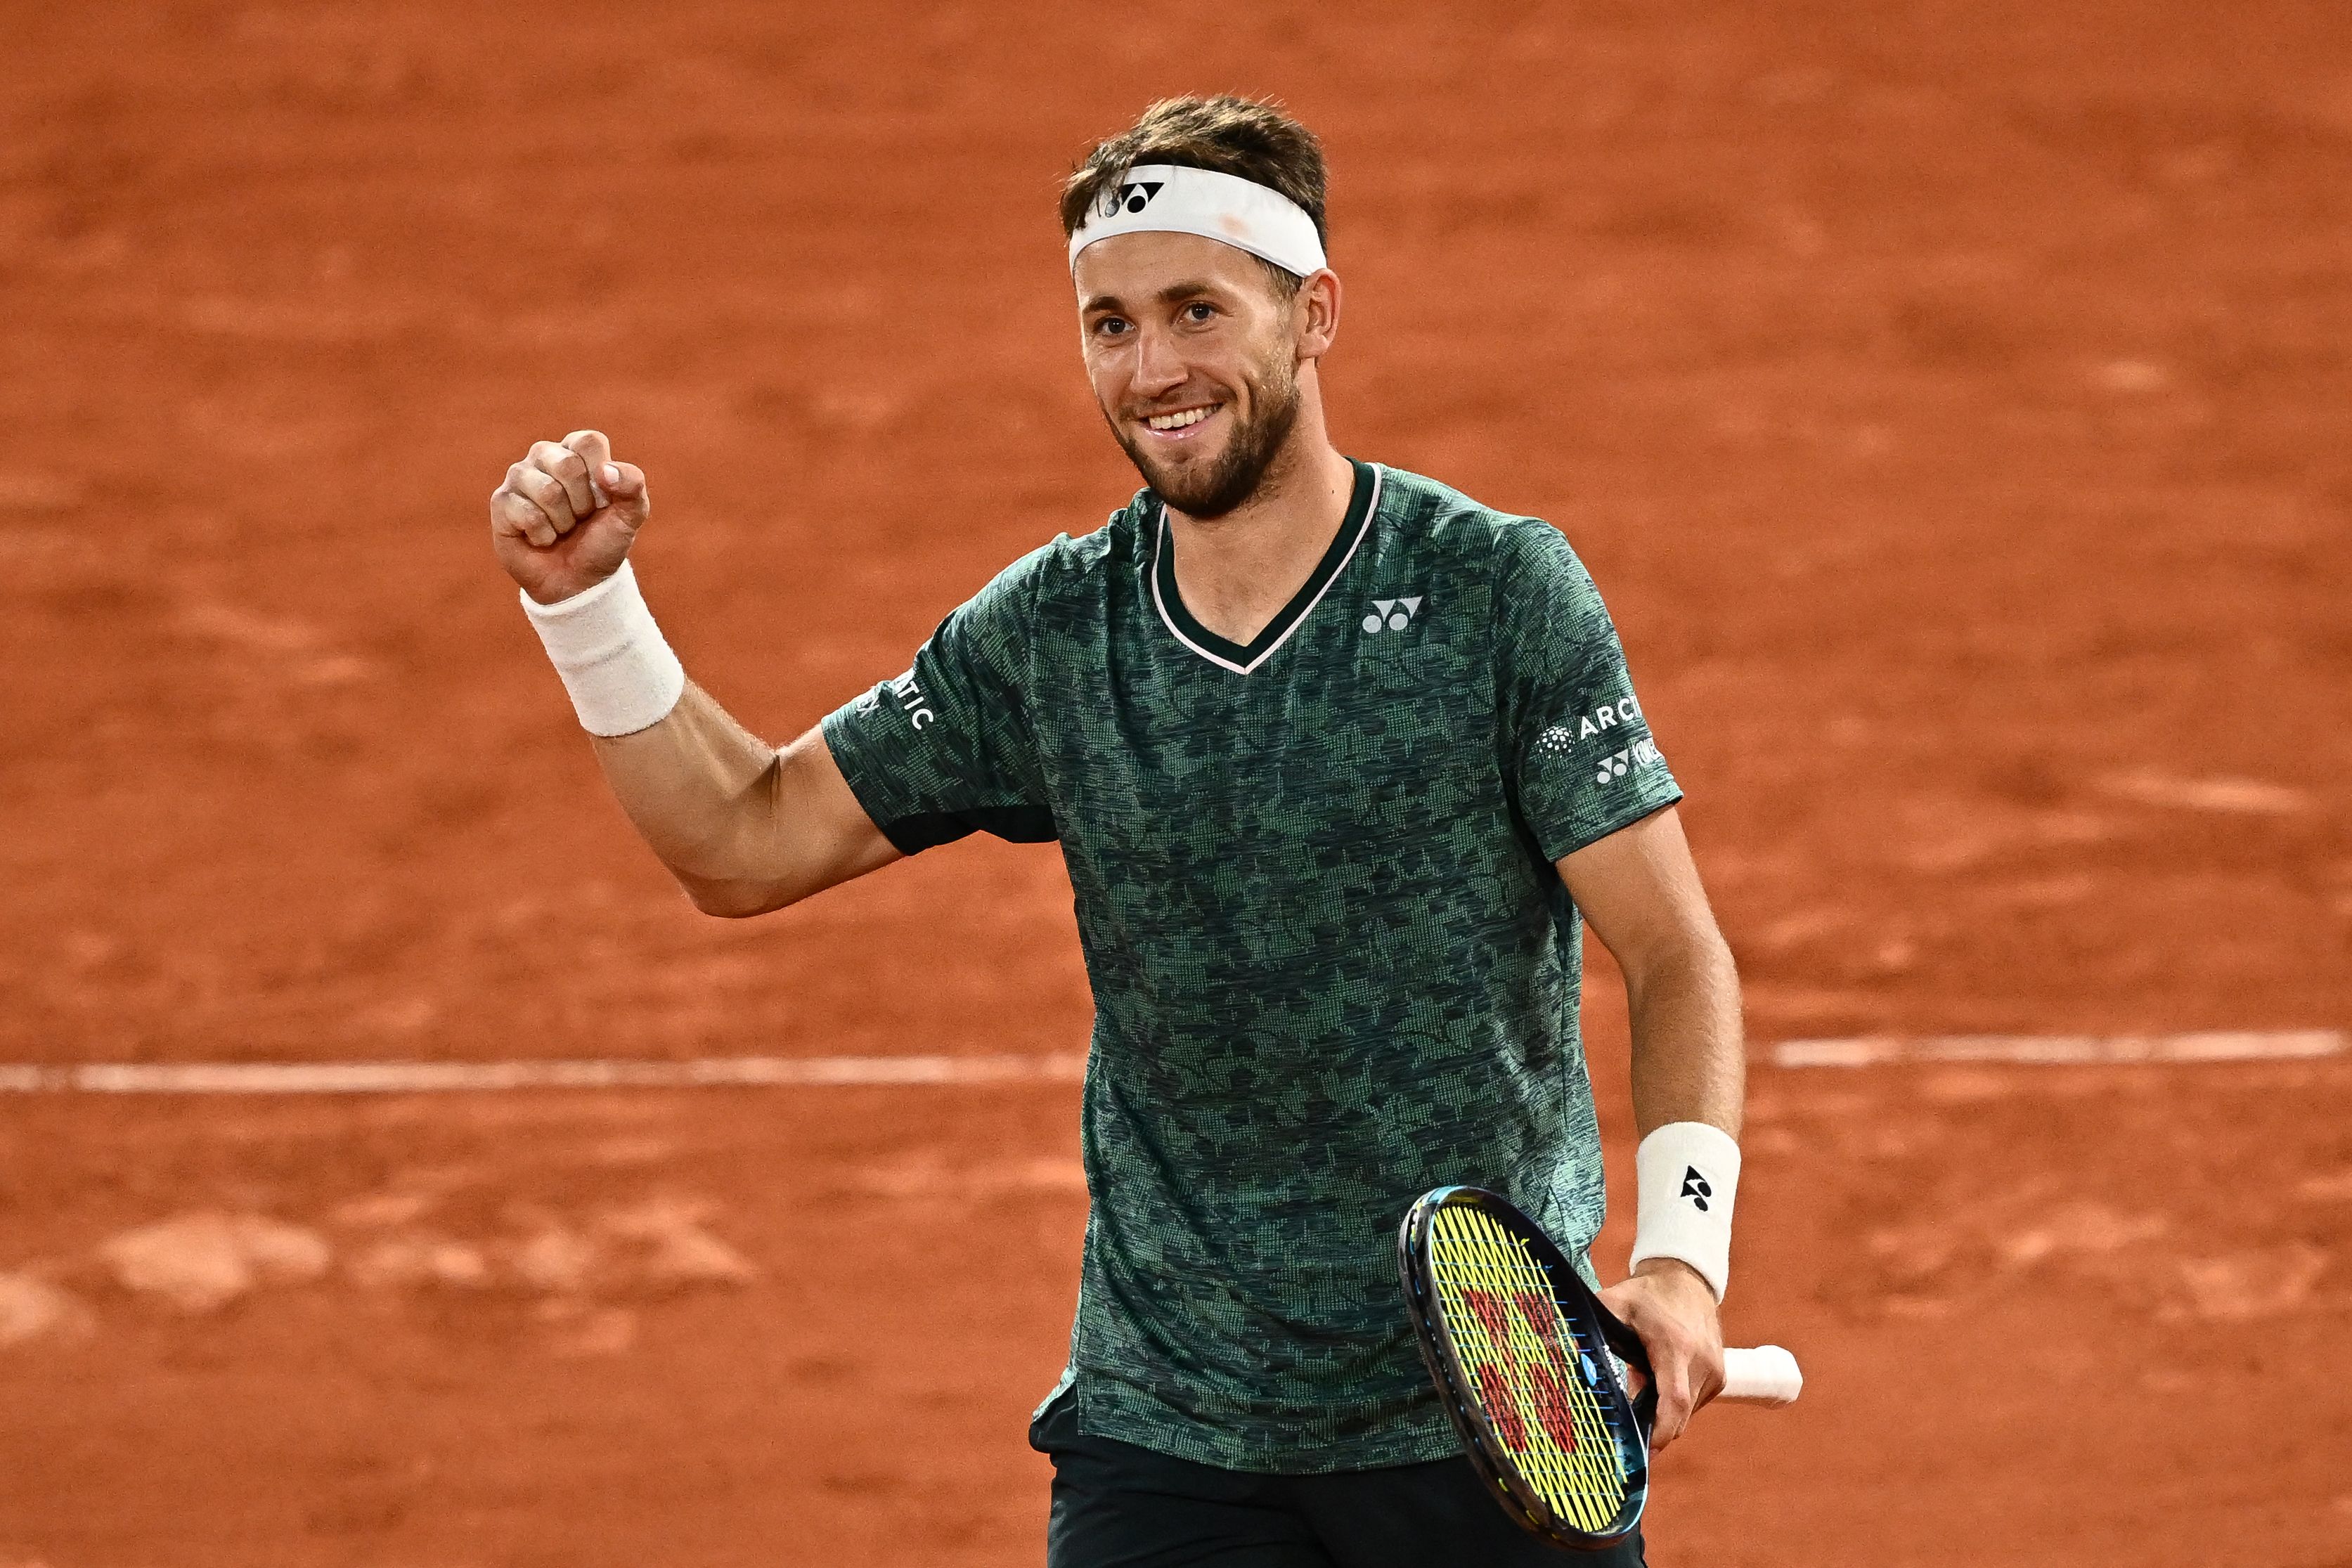 Casper Ruud beat Marin Cilic at Roland Garros by channeling the man hell play in his first major final Rafael Nadal